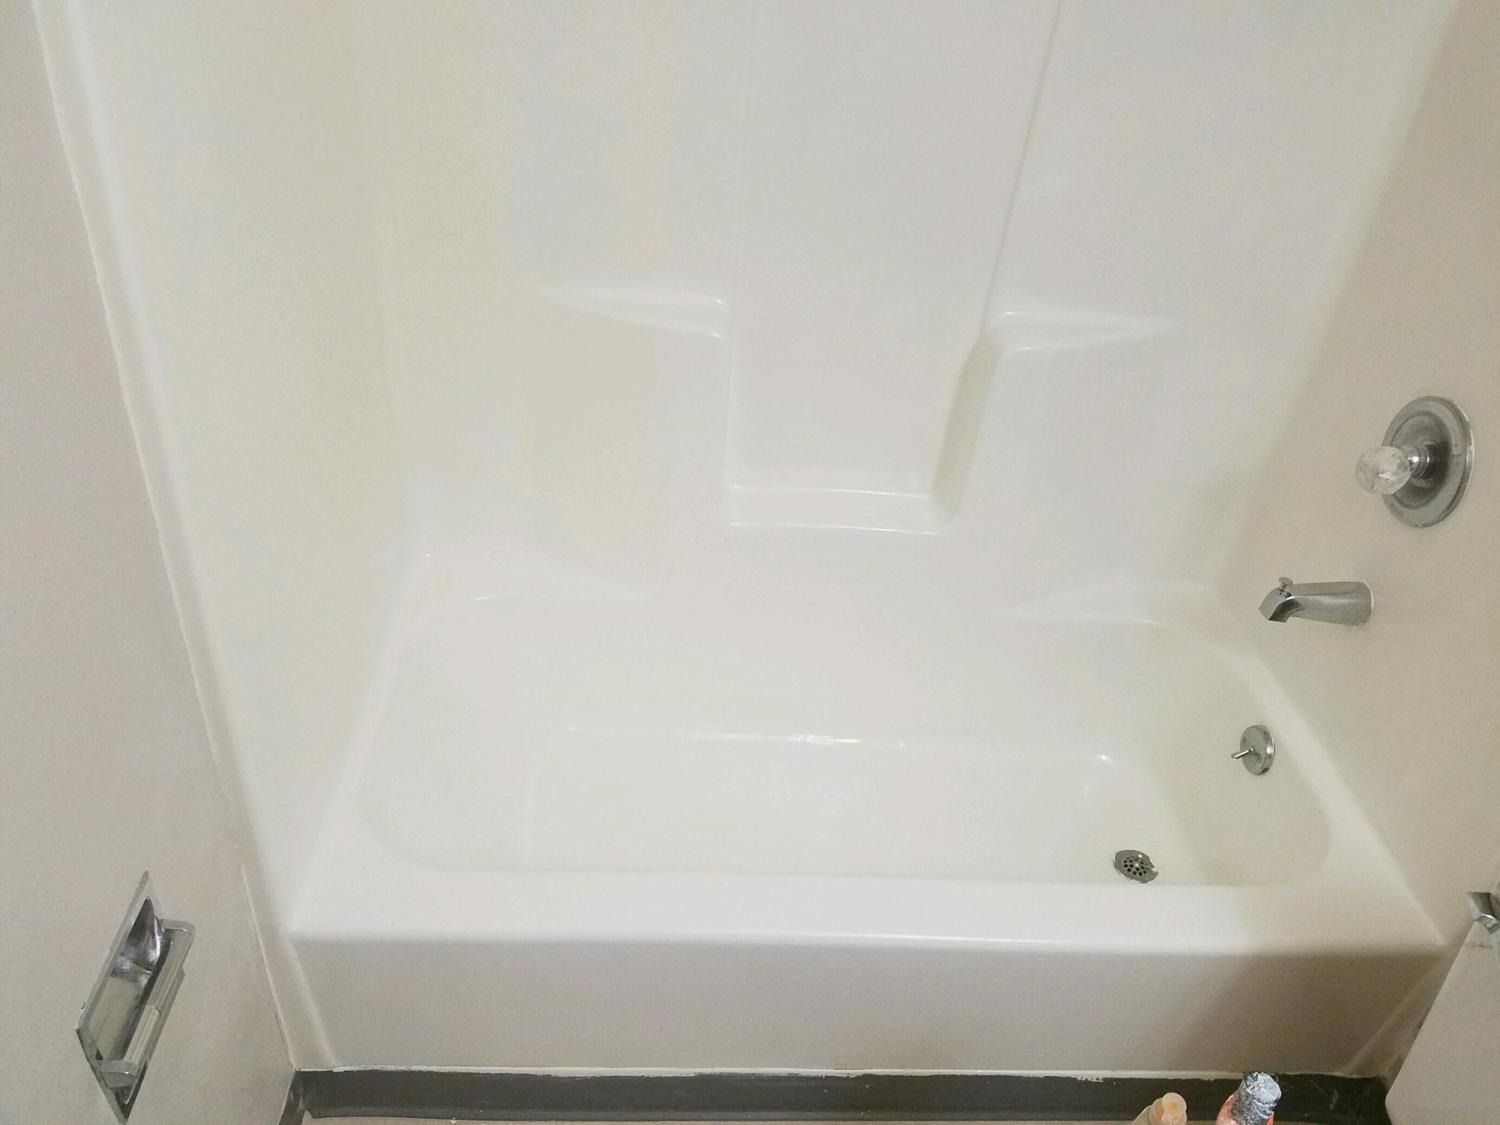 Fiberglass tub shower combo is refinished and refaced to a brand new finish